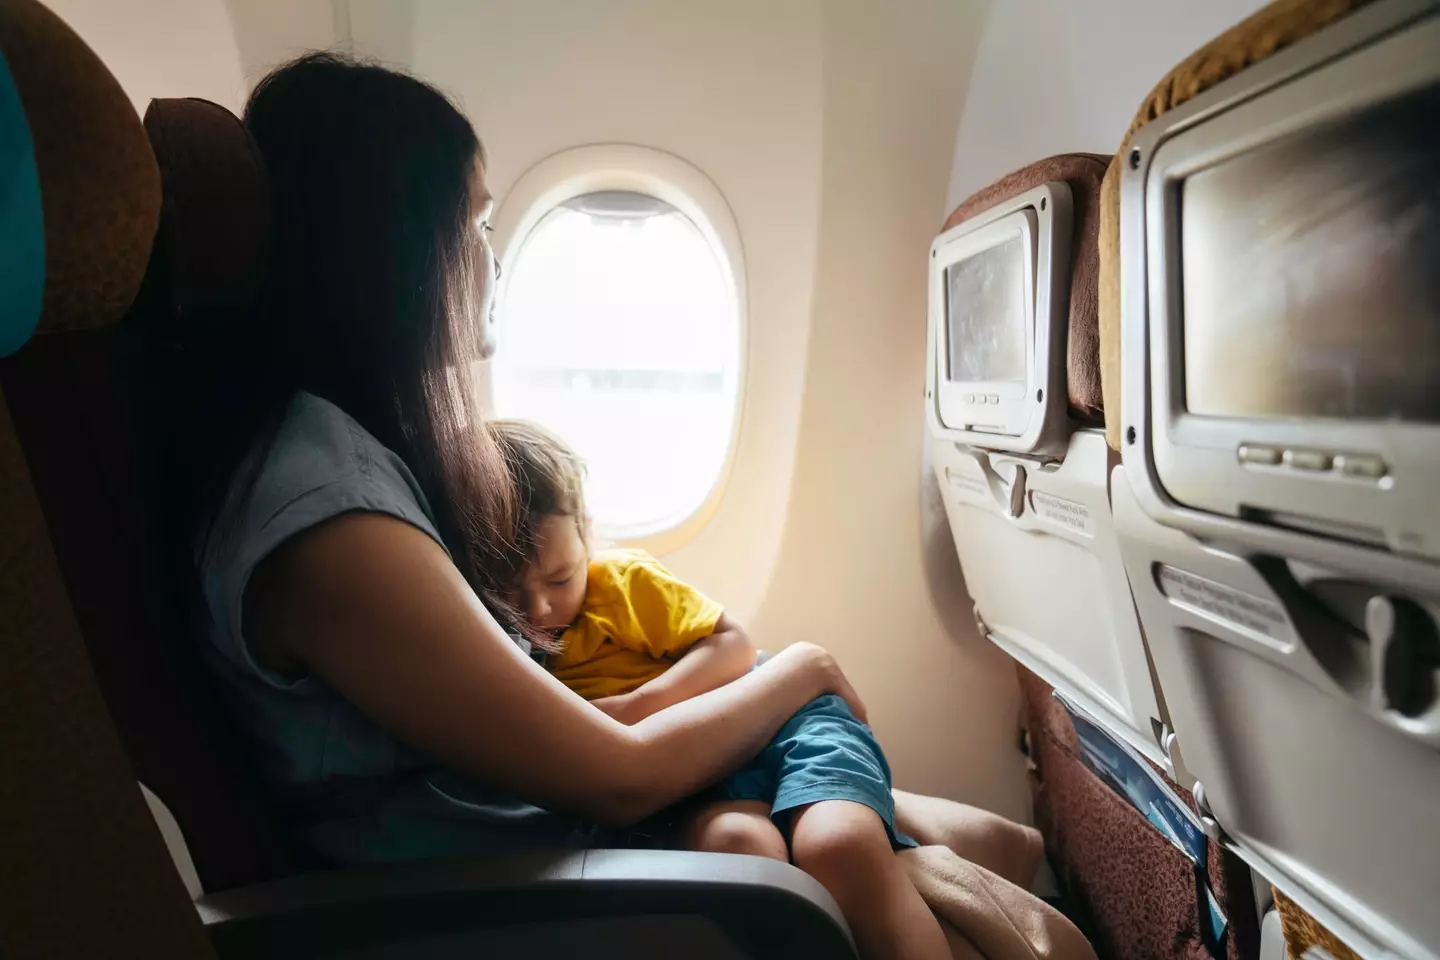 Unfortunately there was a mother who hadn't booked a seat for her baby who wanted the space (stock image).